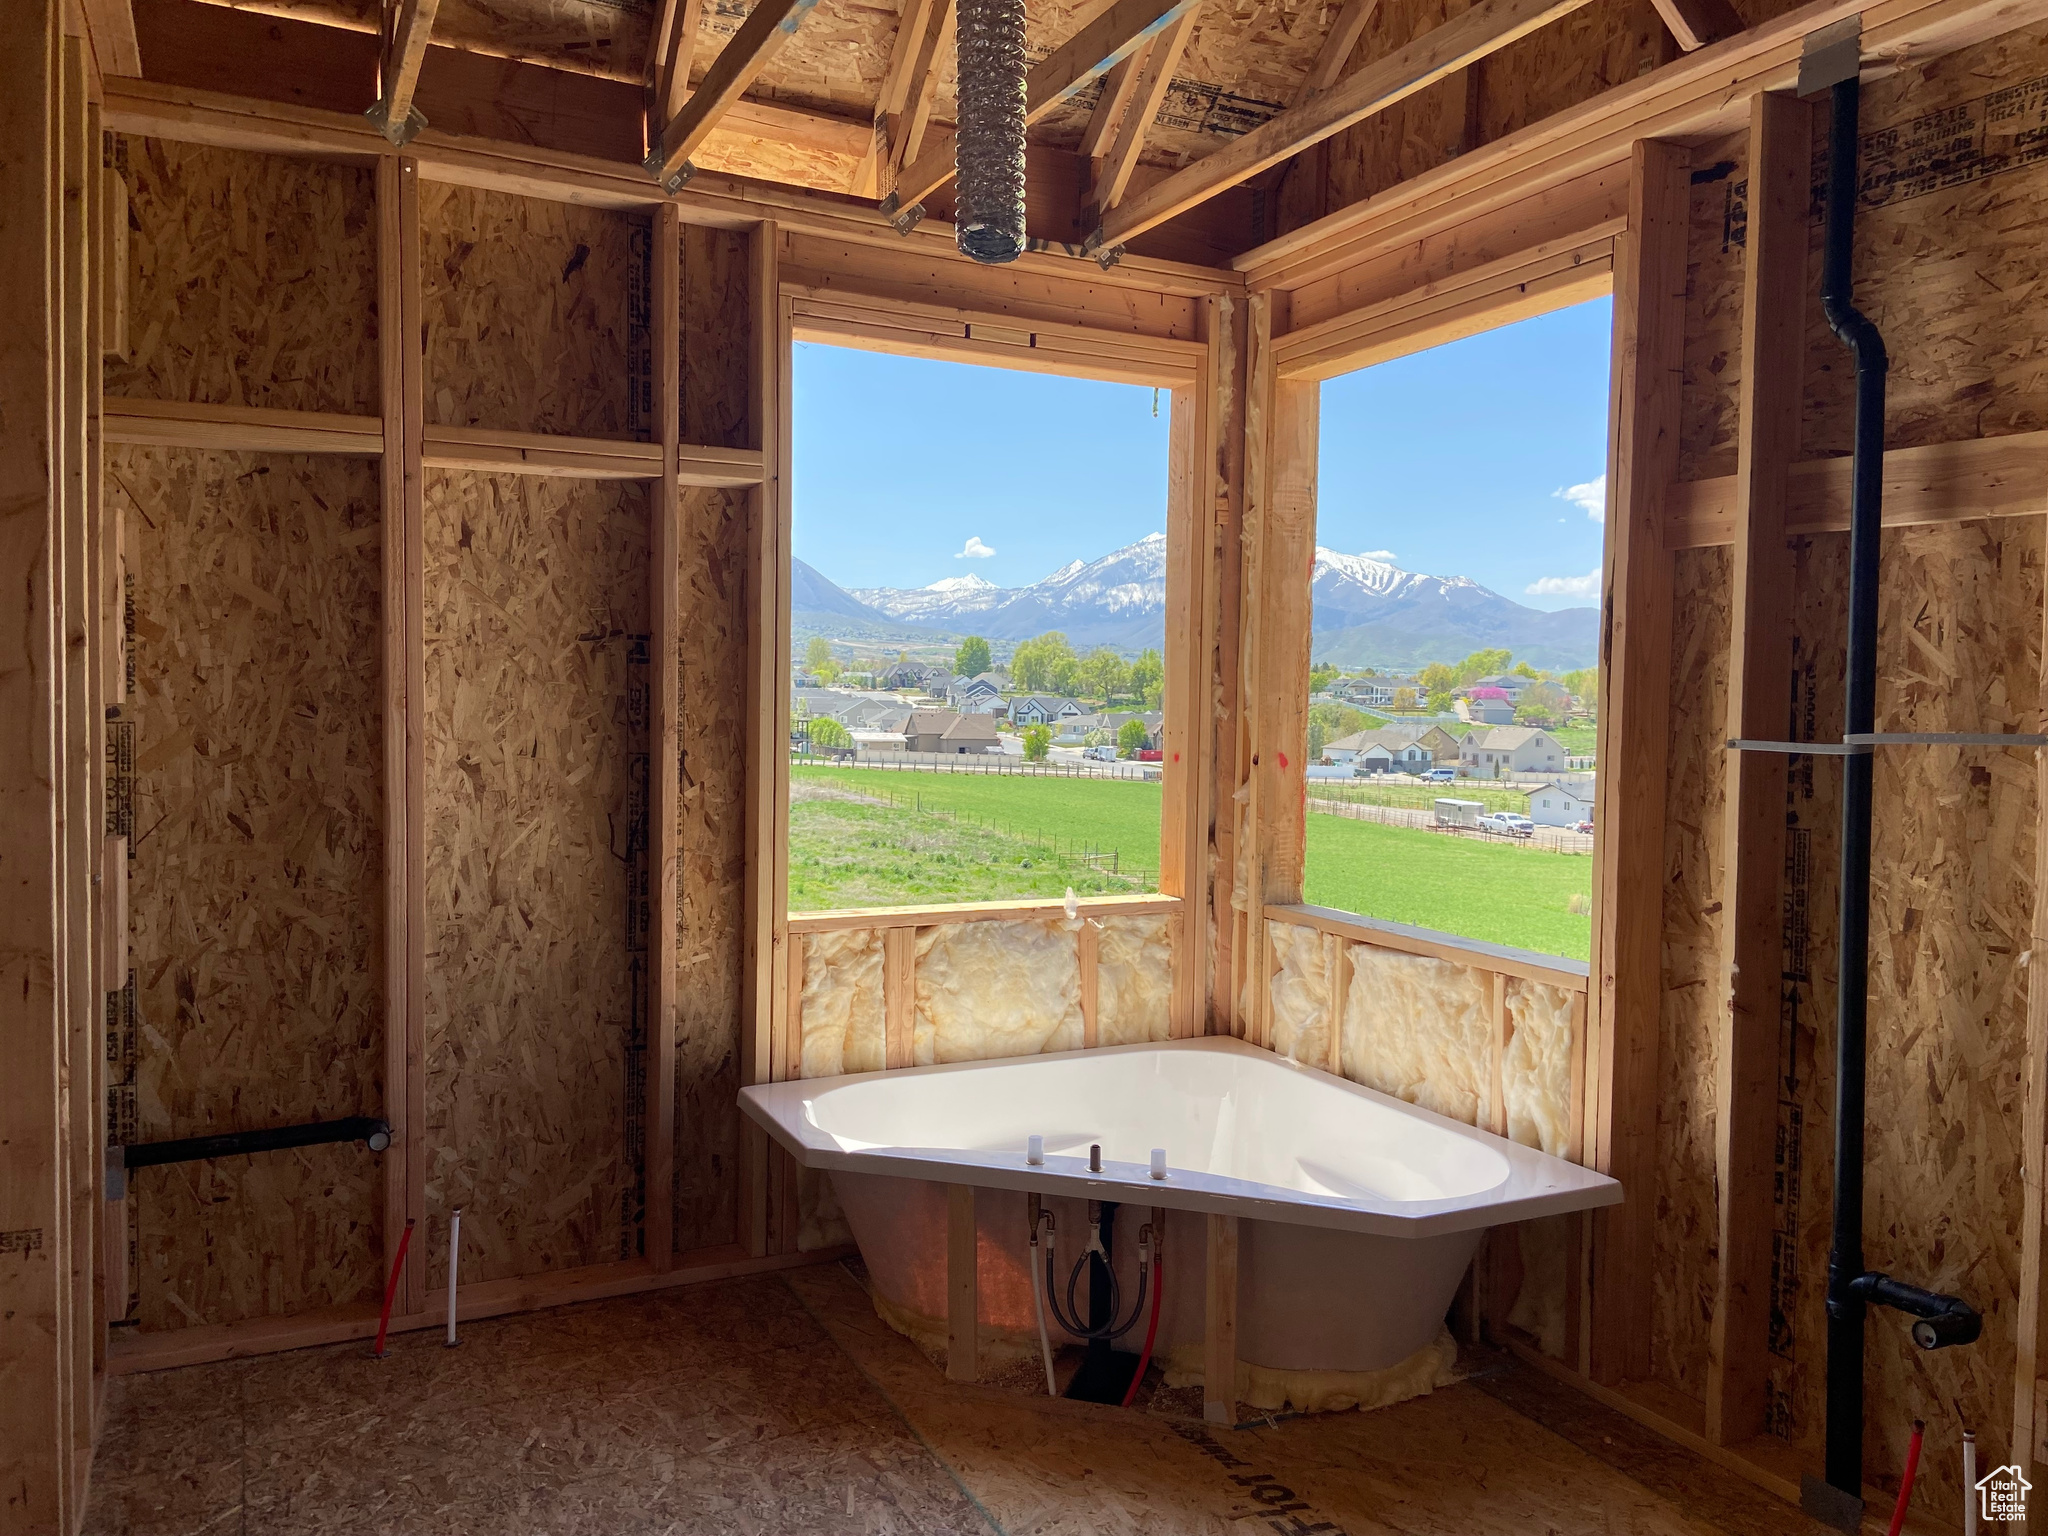 Primary bathroom - Views to the south and east